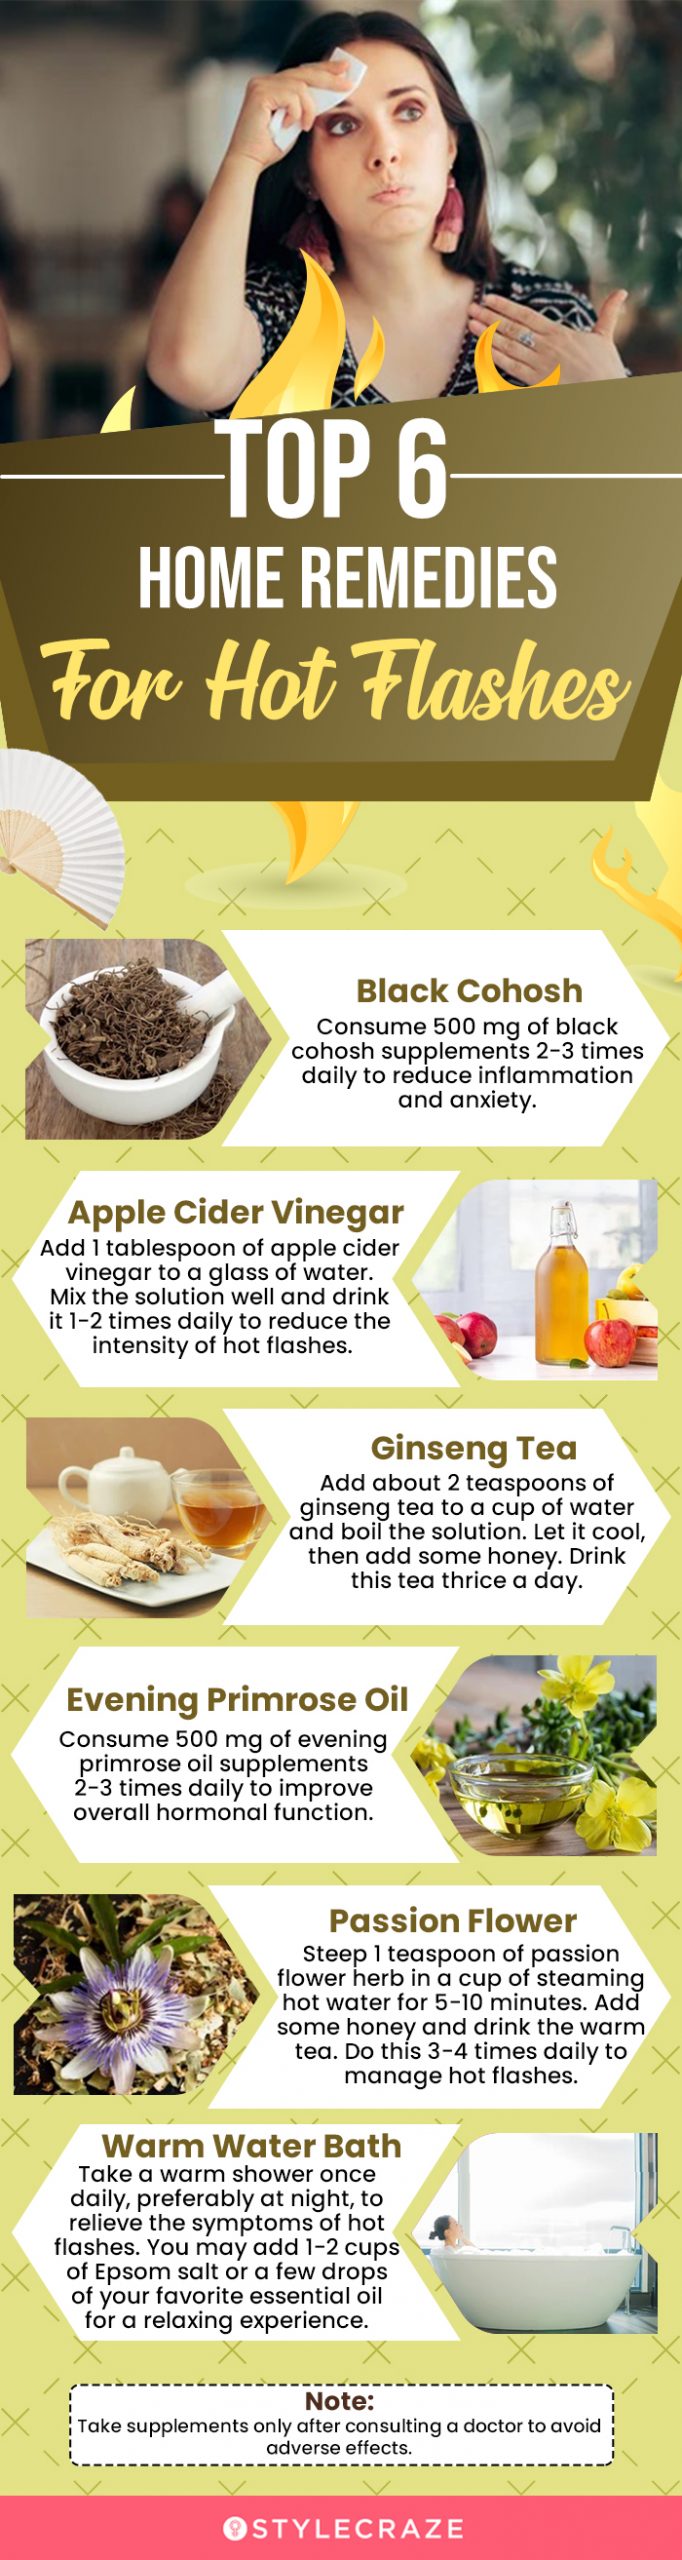 top 6 home remedies for hot flashes (infographic)